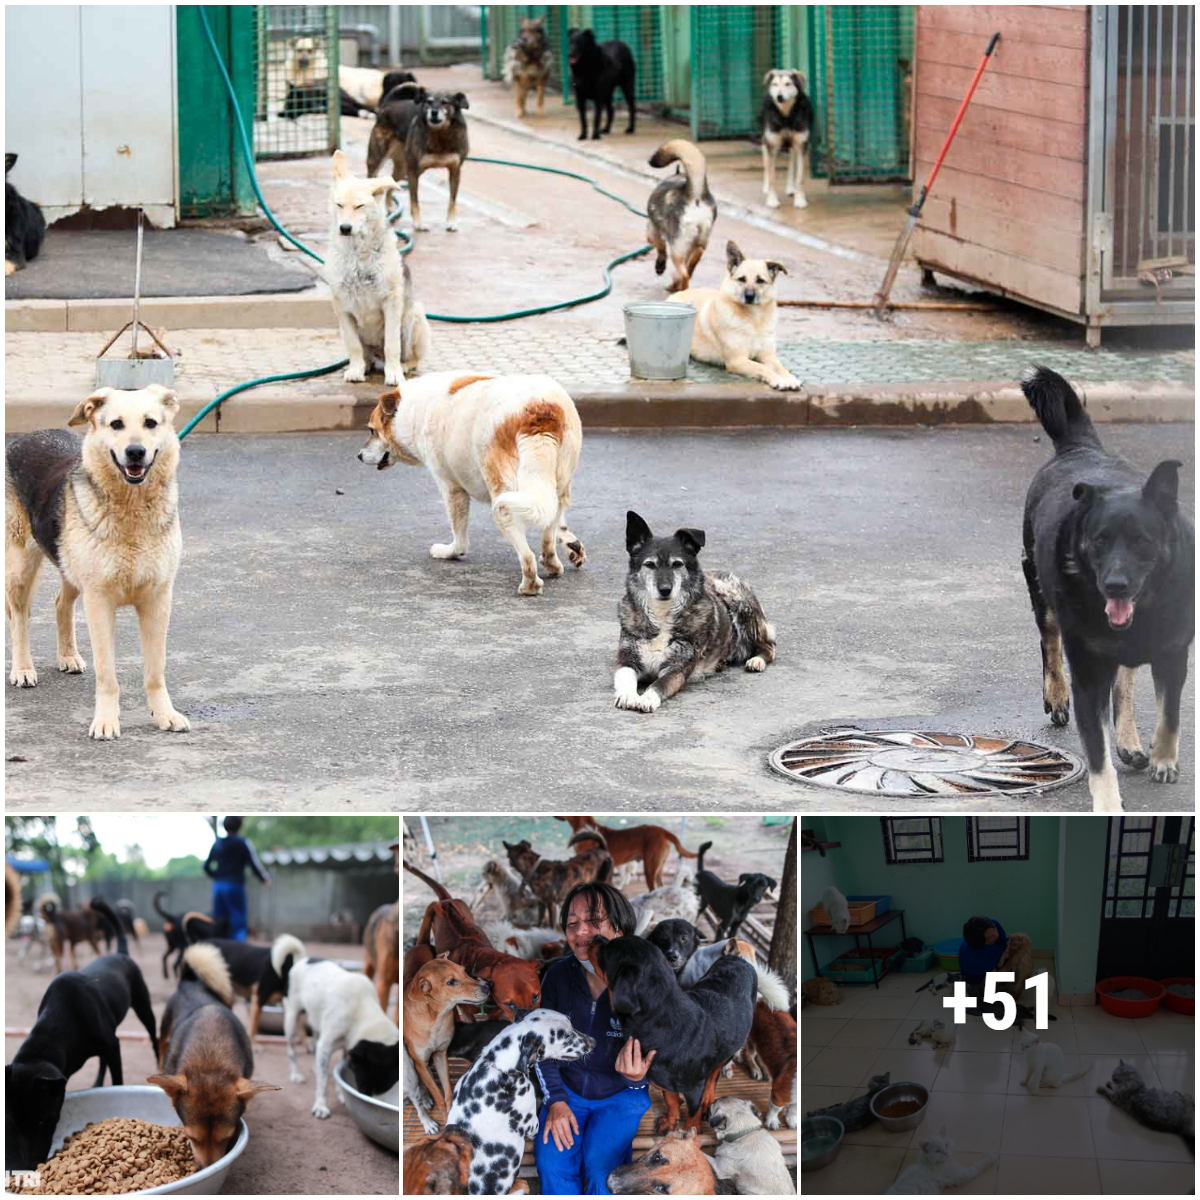 Abandoned dogs gather at shelters and wait for a full meal – the sad image of them just waiting for a full meal evokes strong emotions in the hearts of people around the world.